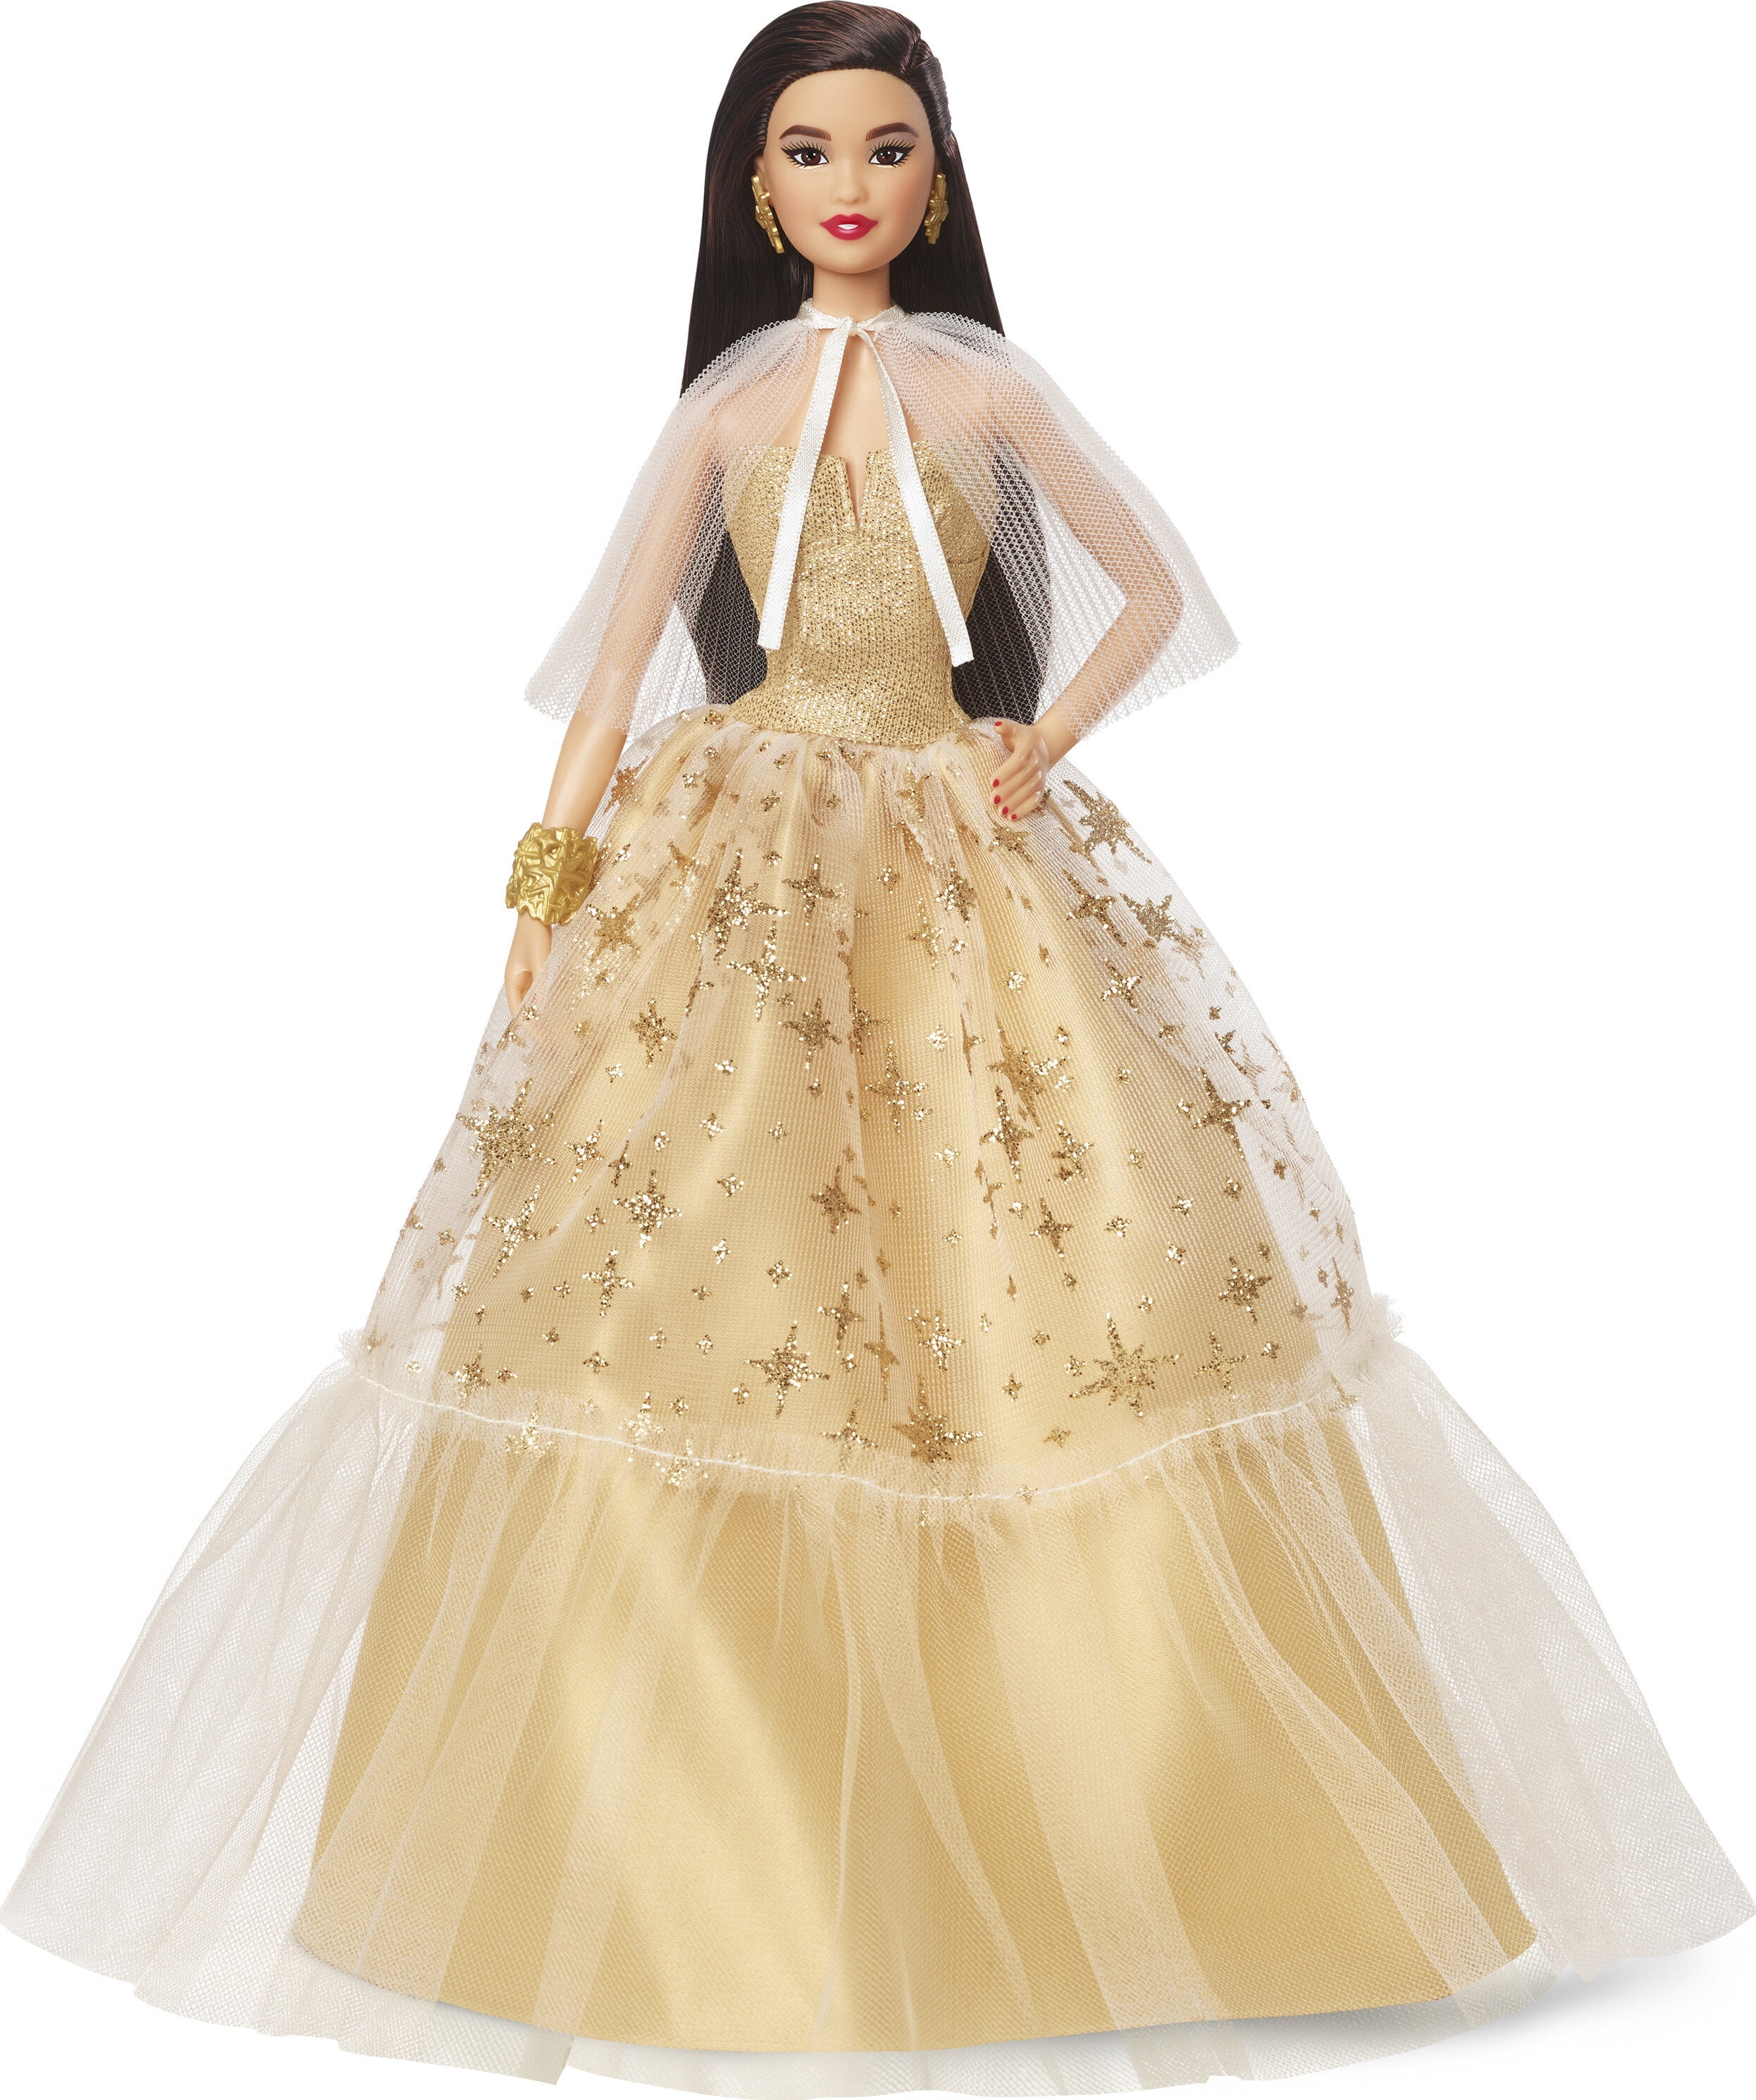 New Dress for sell EFDD | Doll dress, Barbie gowns, Barbie clothes patterns